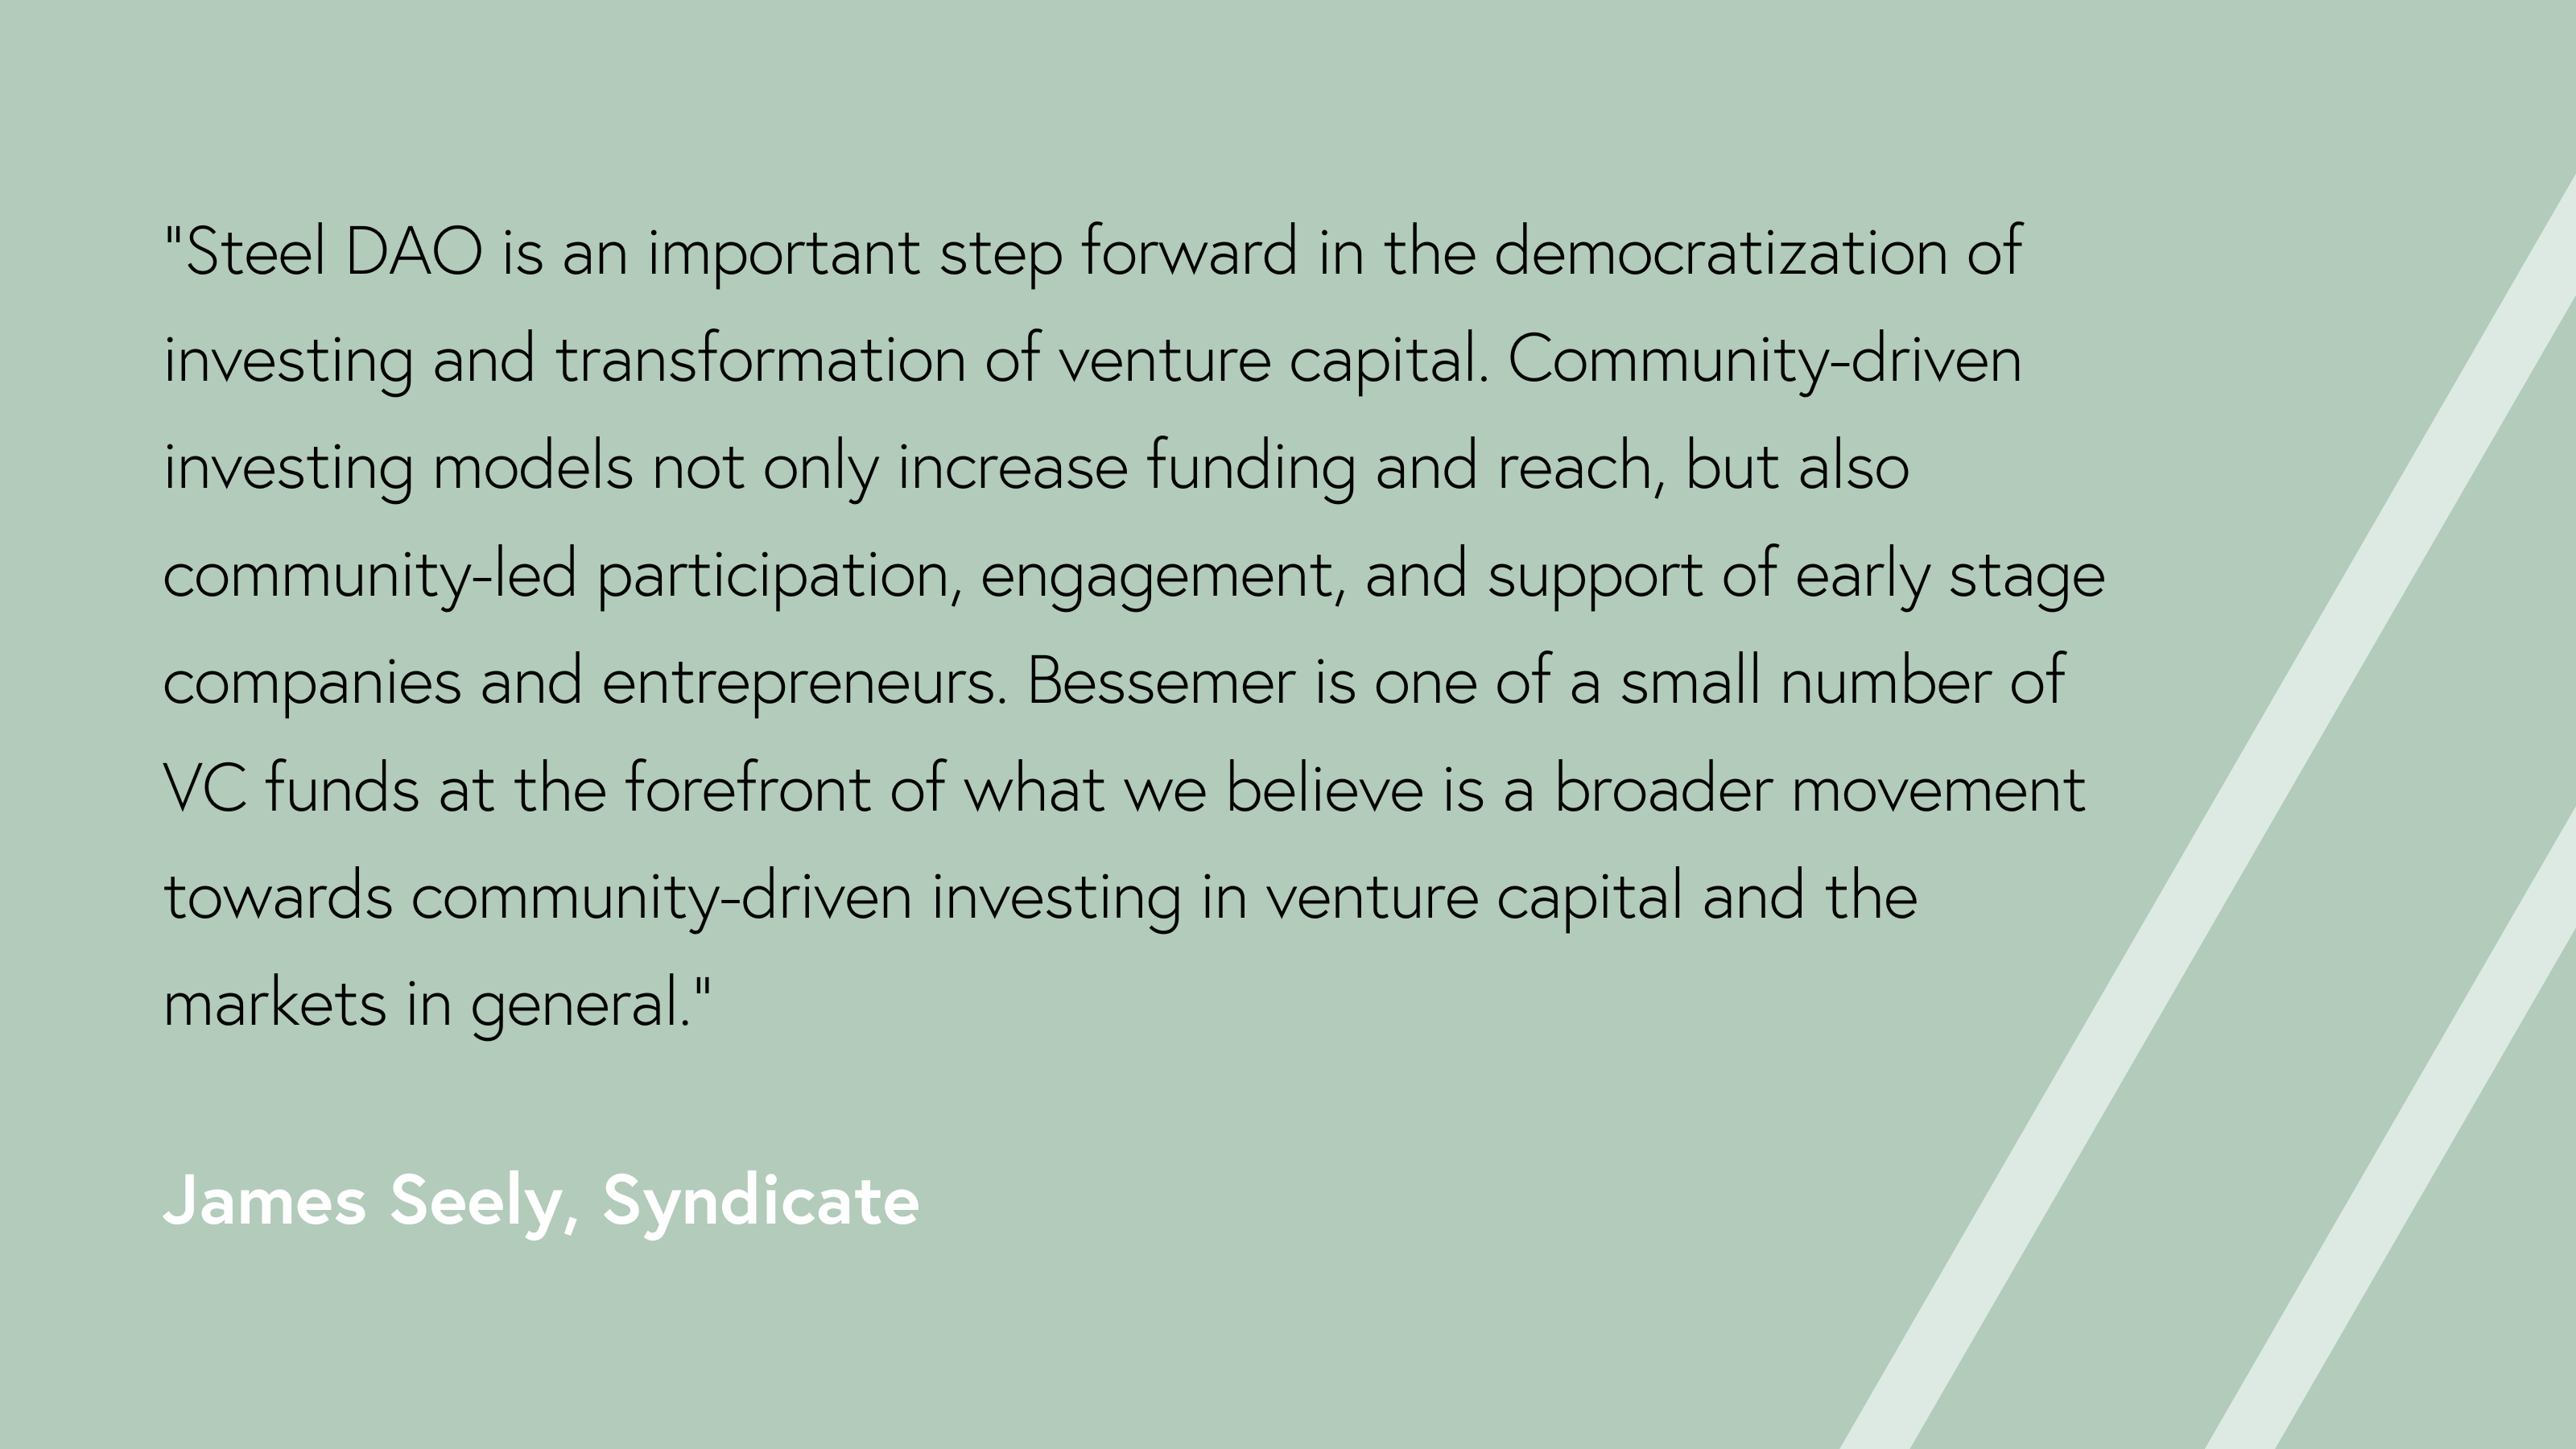 “Steel DAO is an important step forward in the democratization of investing and transformation of venture capital. Community-driven investing models not only increase funding and reach, but also community-led participation, engagement, and support of early stage companies and entrepreneurs. Bessemer is one of a small number of VC funds at the forefront of what we believe is a broader movement towards community-driven investing in venture capital and the markets in general,” said James Seely of Syndicate.  